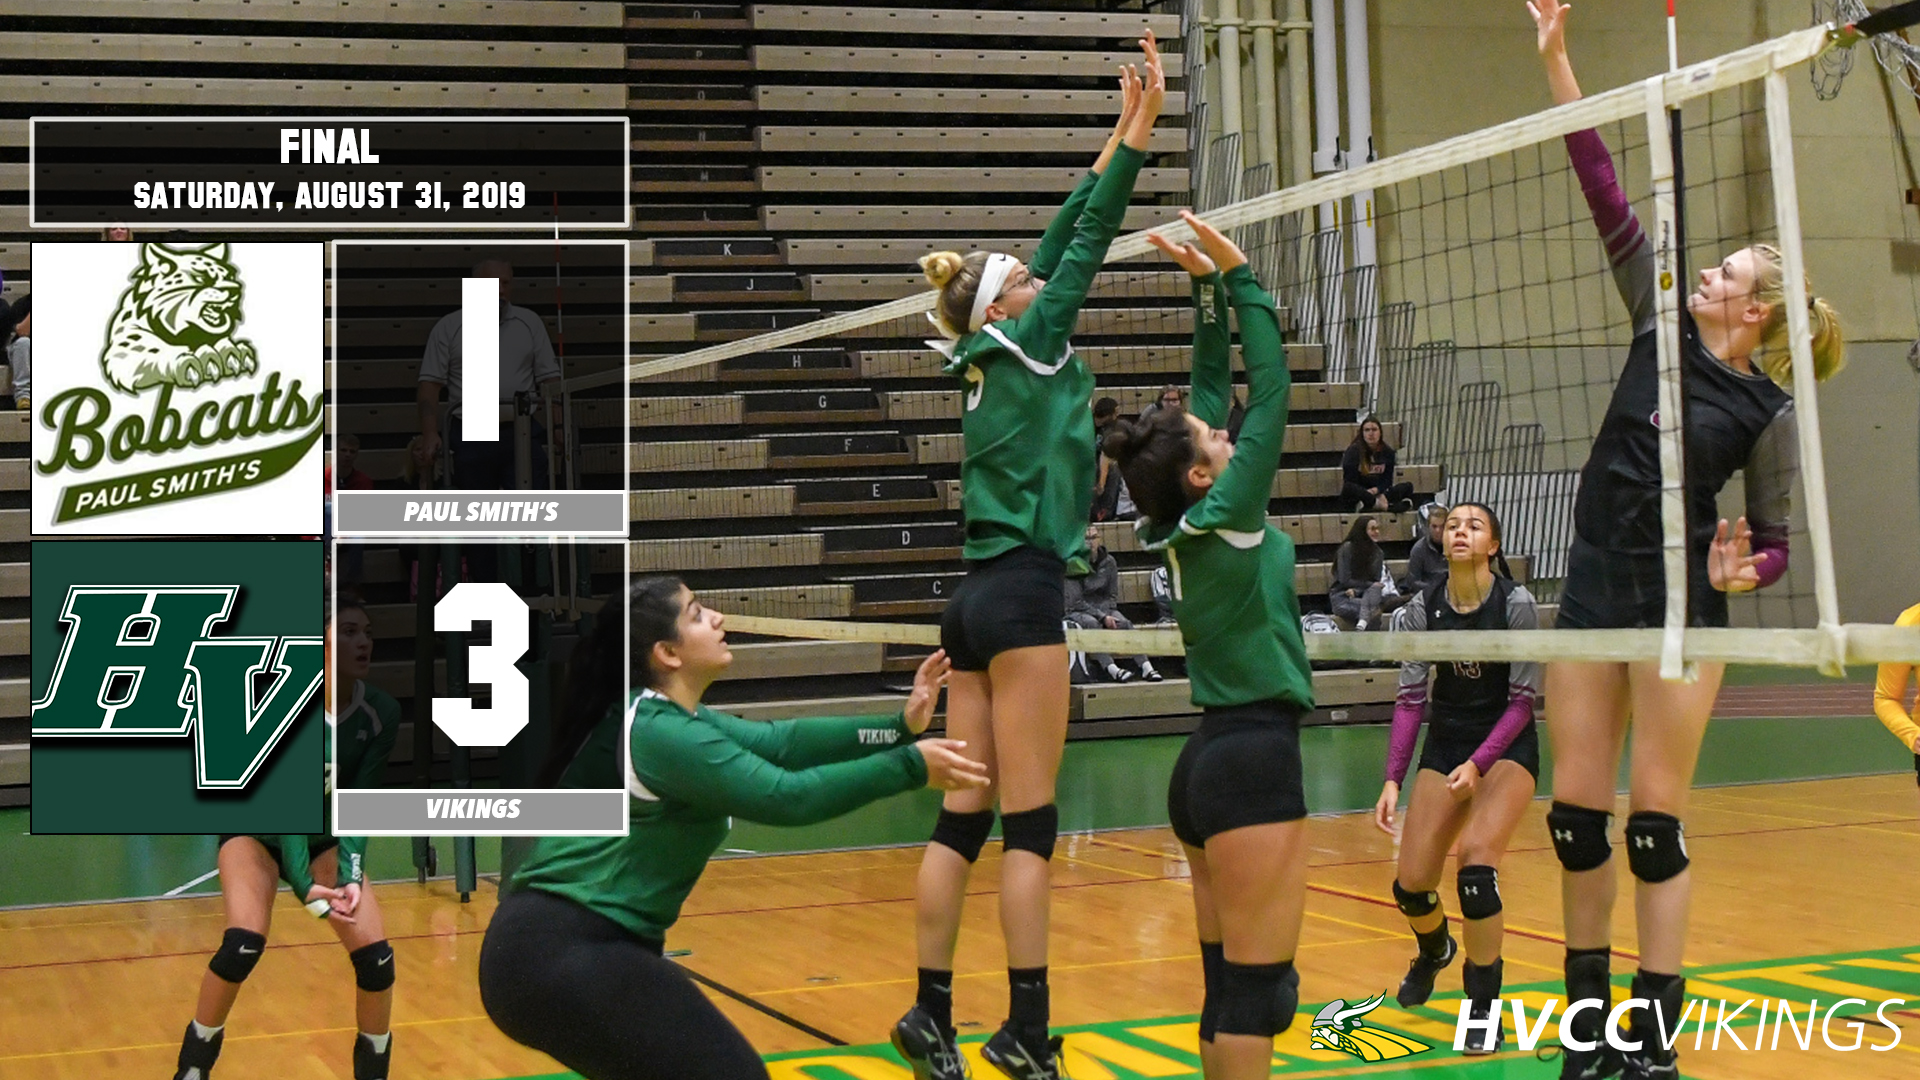 HVCC Volleyball defeats Paul Smith's 3-1